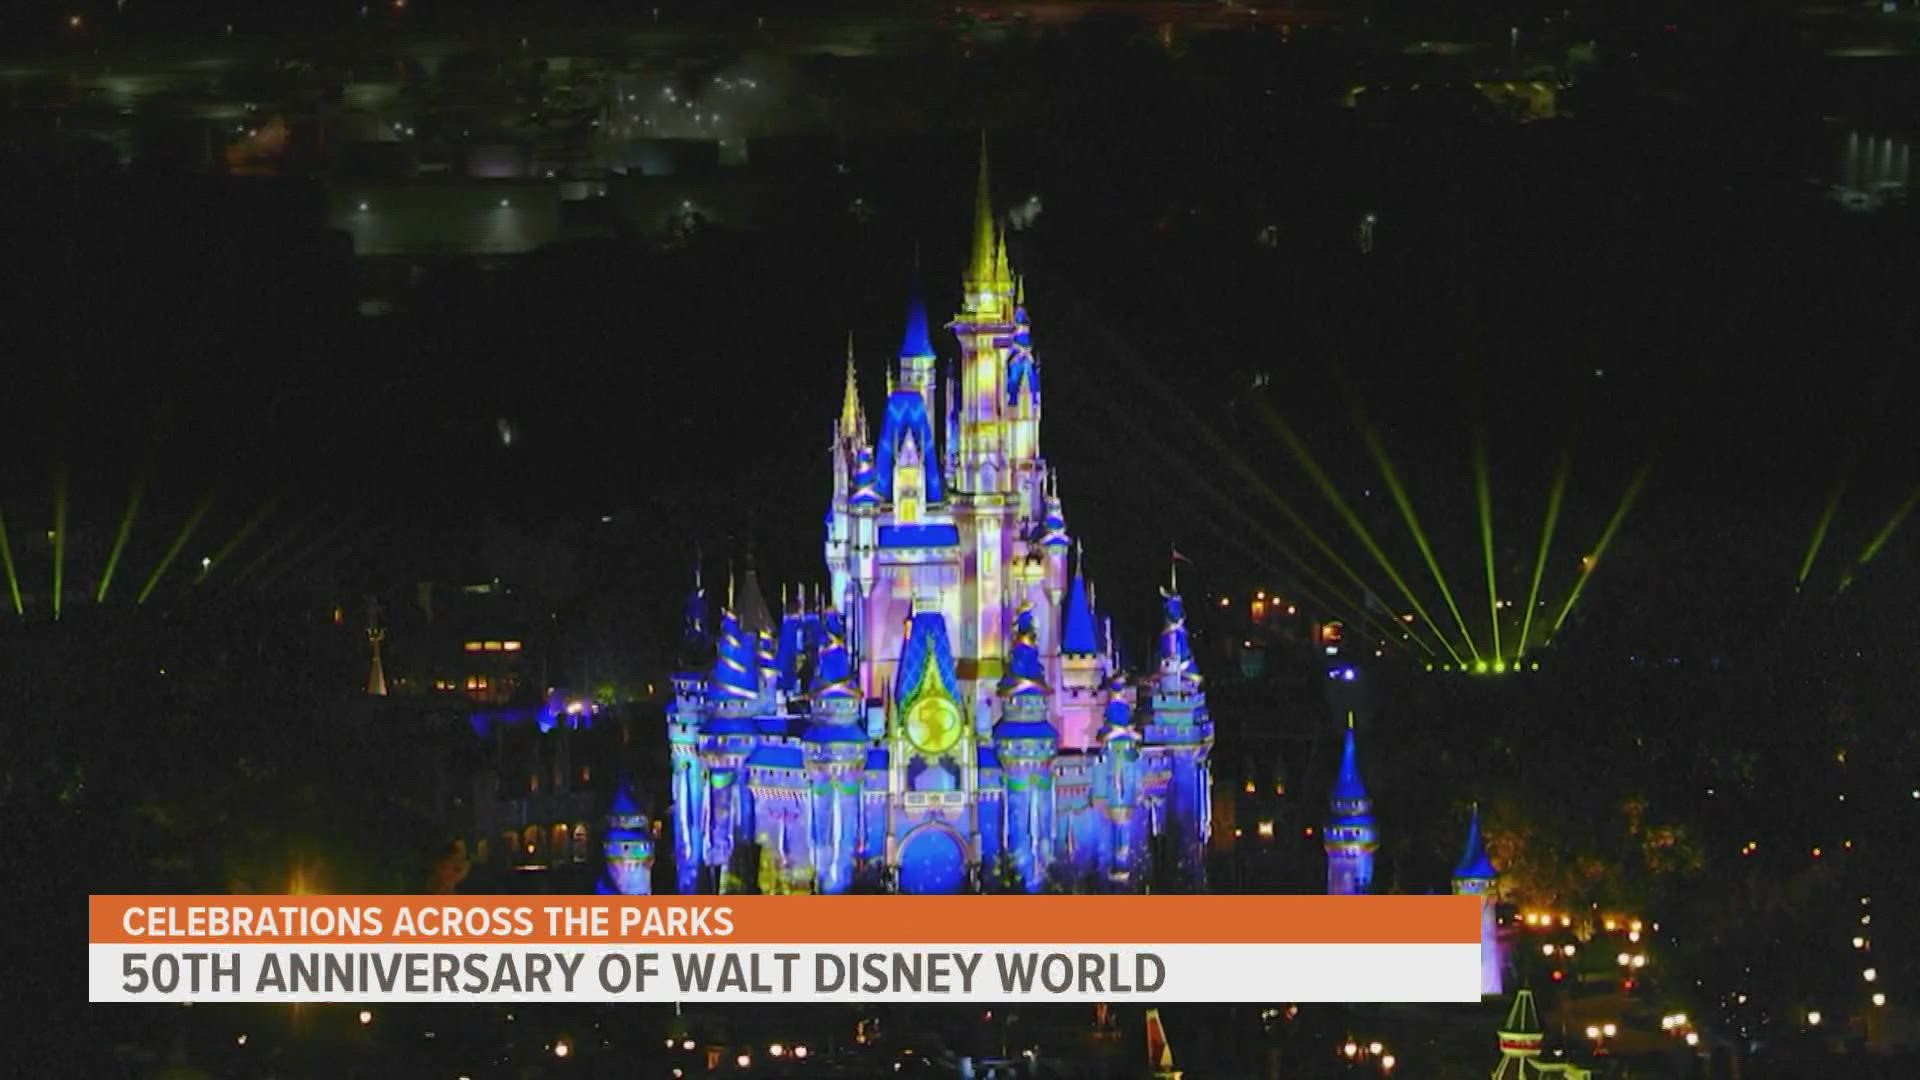 It's official, Walt Disney World has turned the big 5-0! To celebrate, the theme park giant is holding a roughly 18-month celebration.